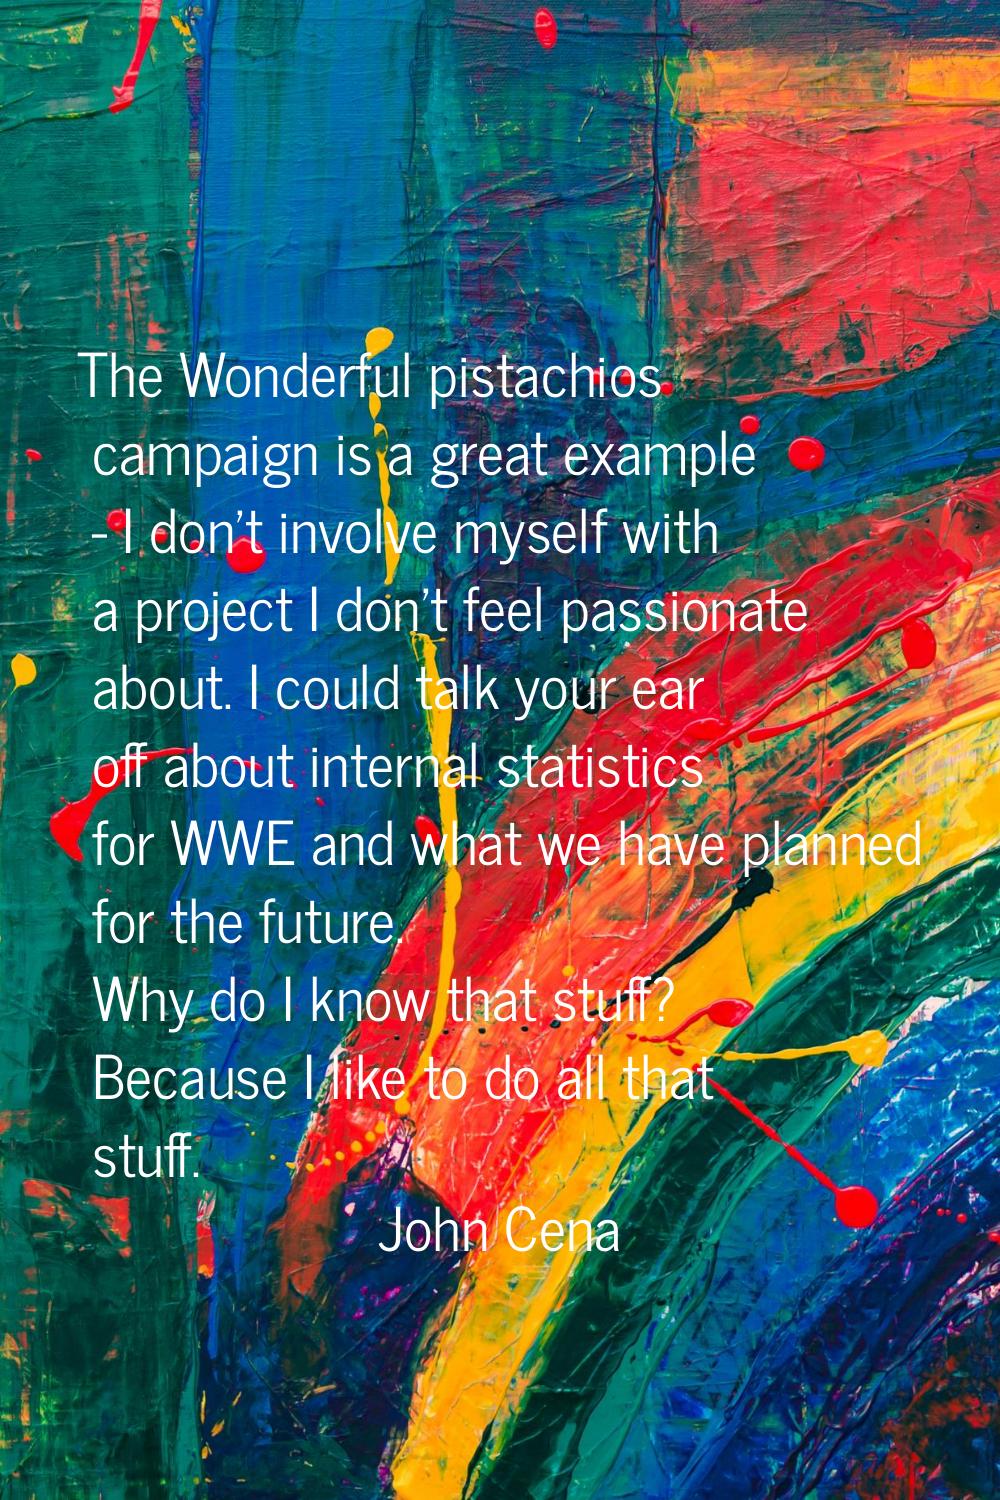 The Wonderful pistachios campaign is a great example - I don't involve myself with a project I don'